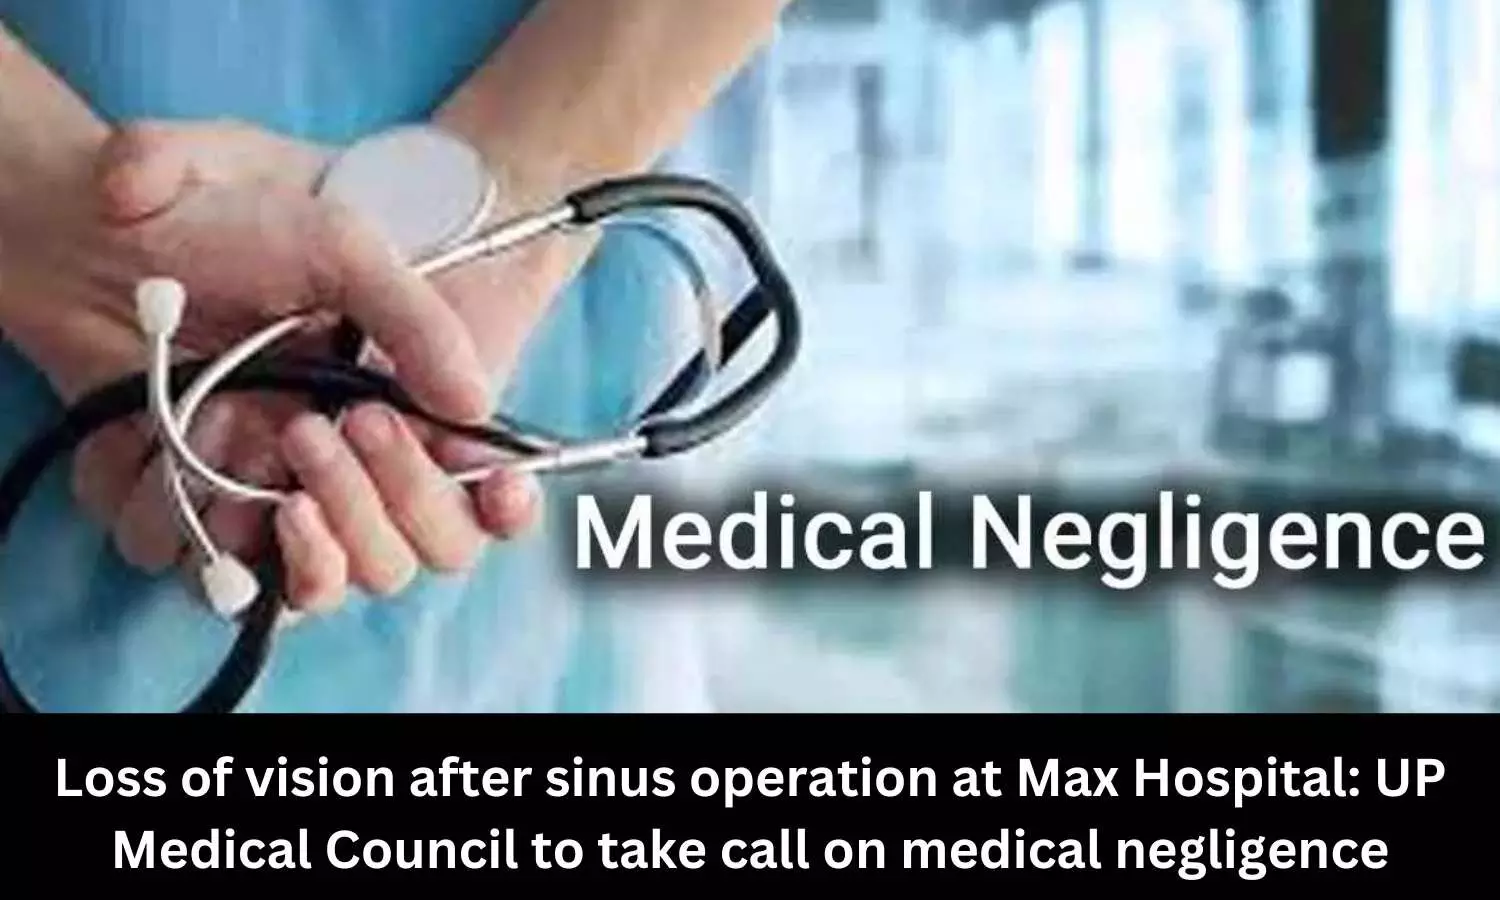 Loss of vision after sinus operation at Max Hospital: UP Medical Council to take call on medical negligence